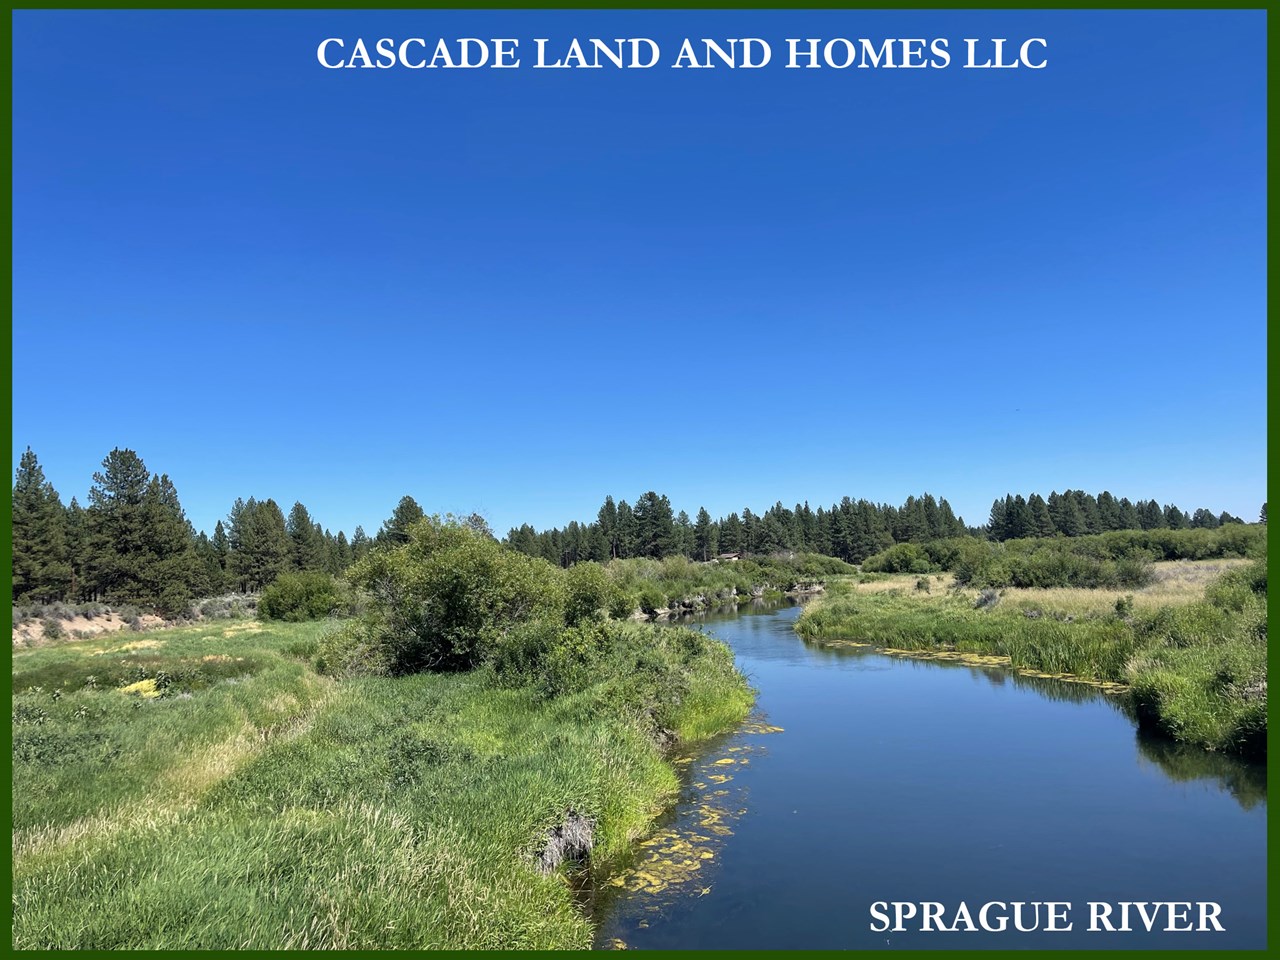 the nearby sprague river can be seen from the property. it's just a short drive away and offers fishing, swimming, floating, fly fishing or just sitting in the sun and watching the water pass by and the ducks swimming along.